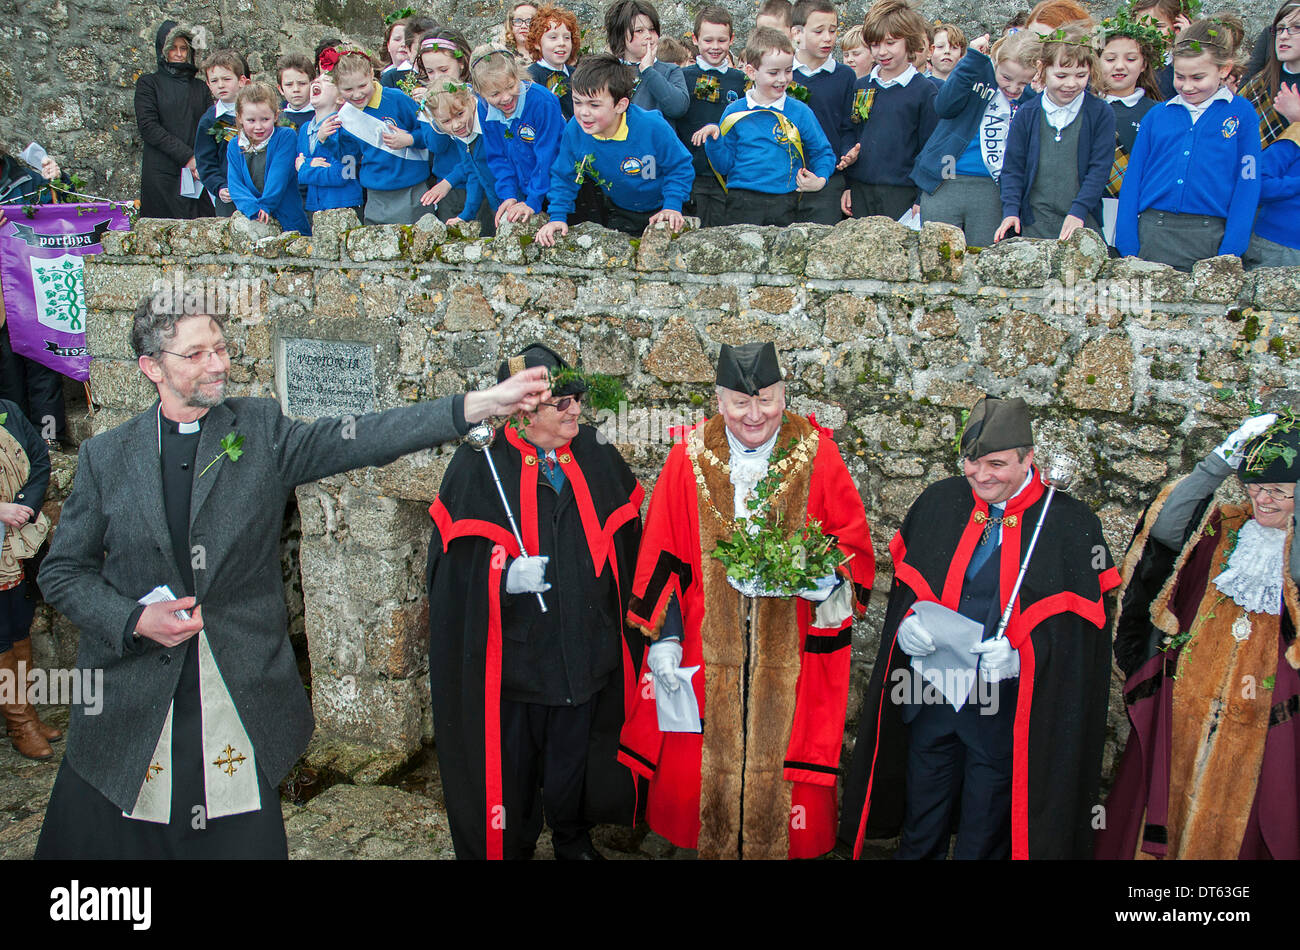 St Ives, Cornwall, UK. 10th Feb, 2014. The local parish priest gives the blessing of the Silver Ball and all people attending the St.Ives feast day celebrations, St.Ives, Cornwall, Feb 10th 2014 Credit:  Kevin Britland/Alamy Live News Stock Photo